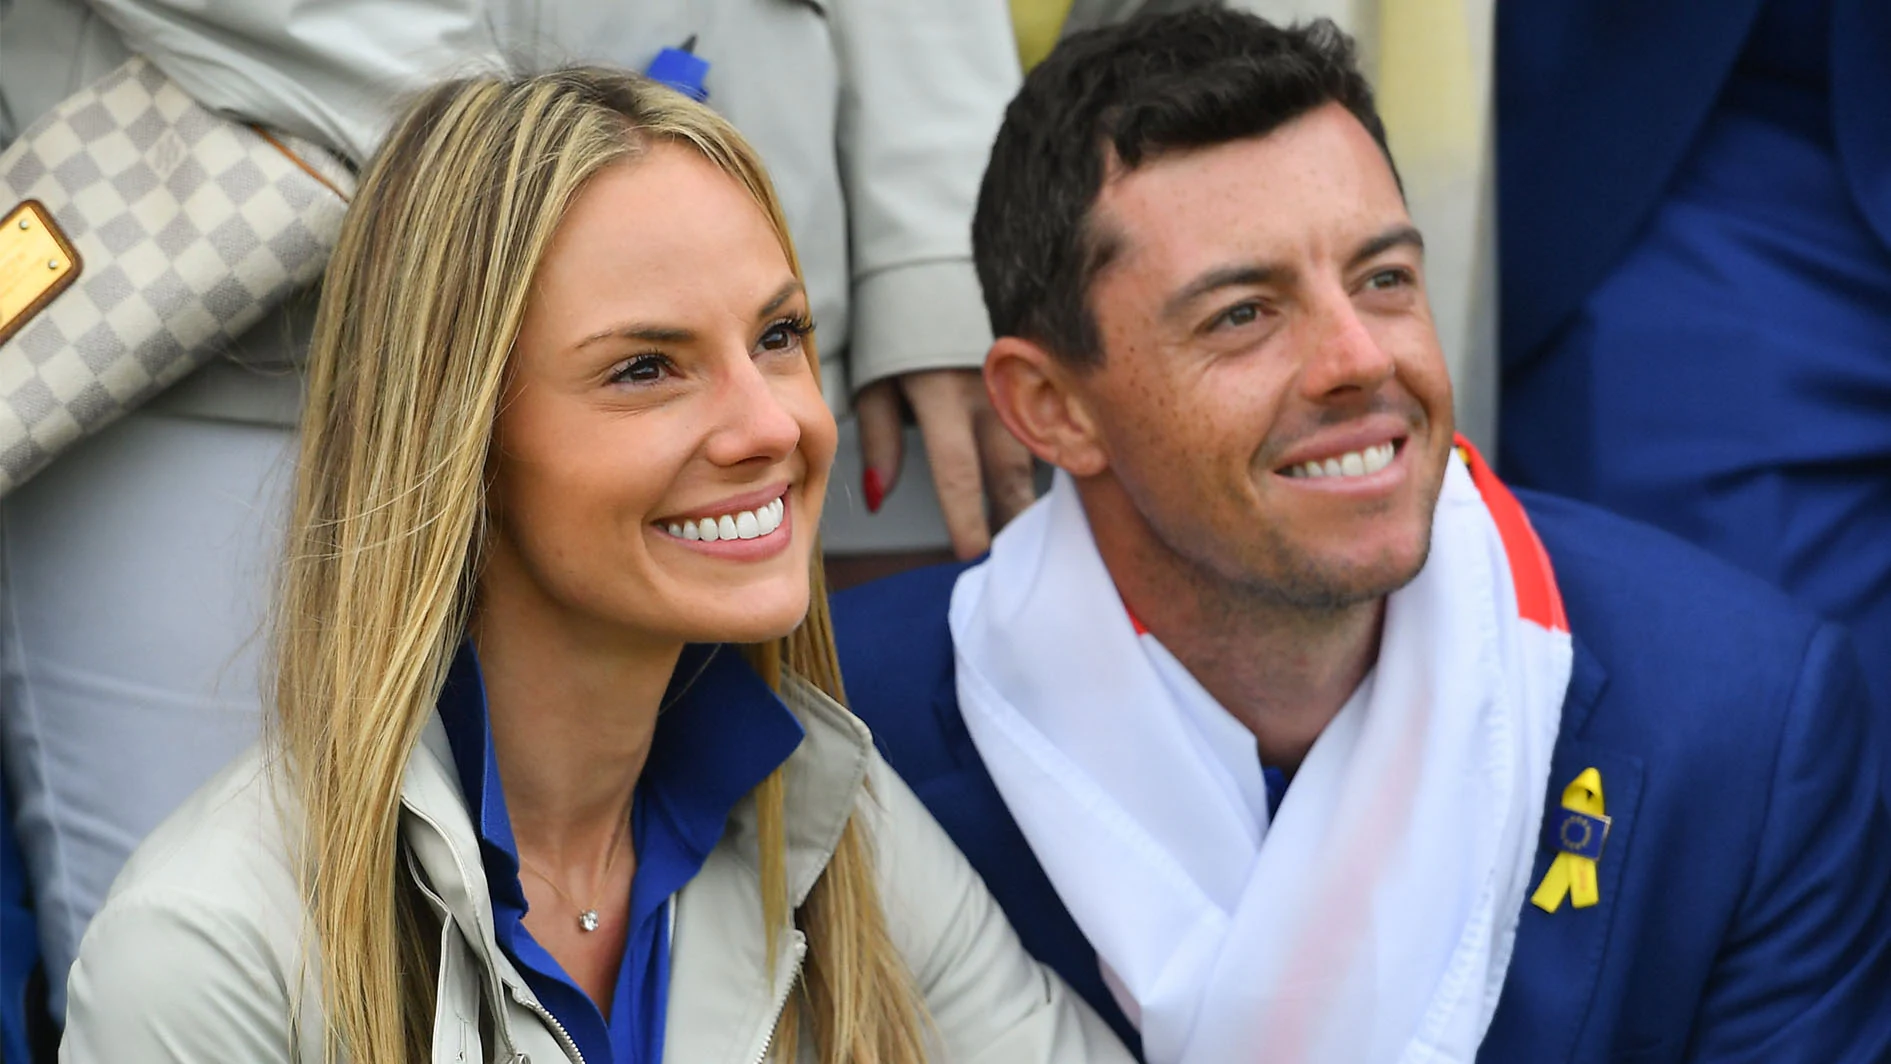 Rory McIlroy, wife Erica expecting baby girl in matter of days